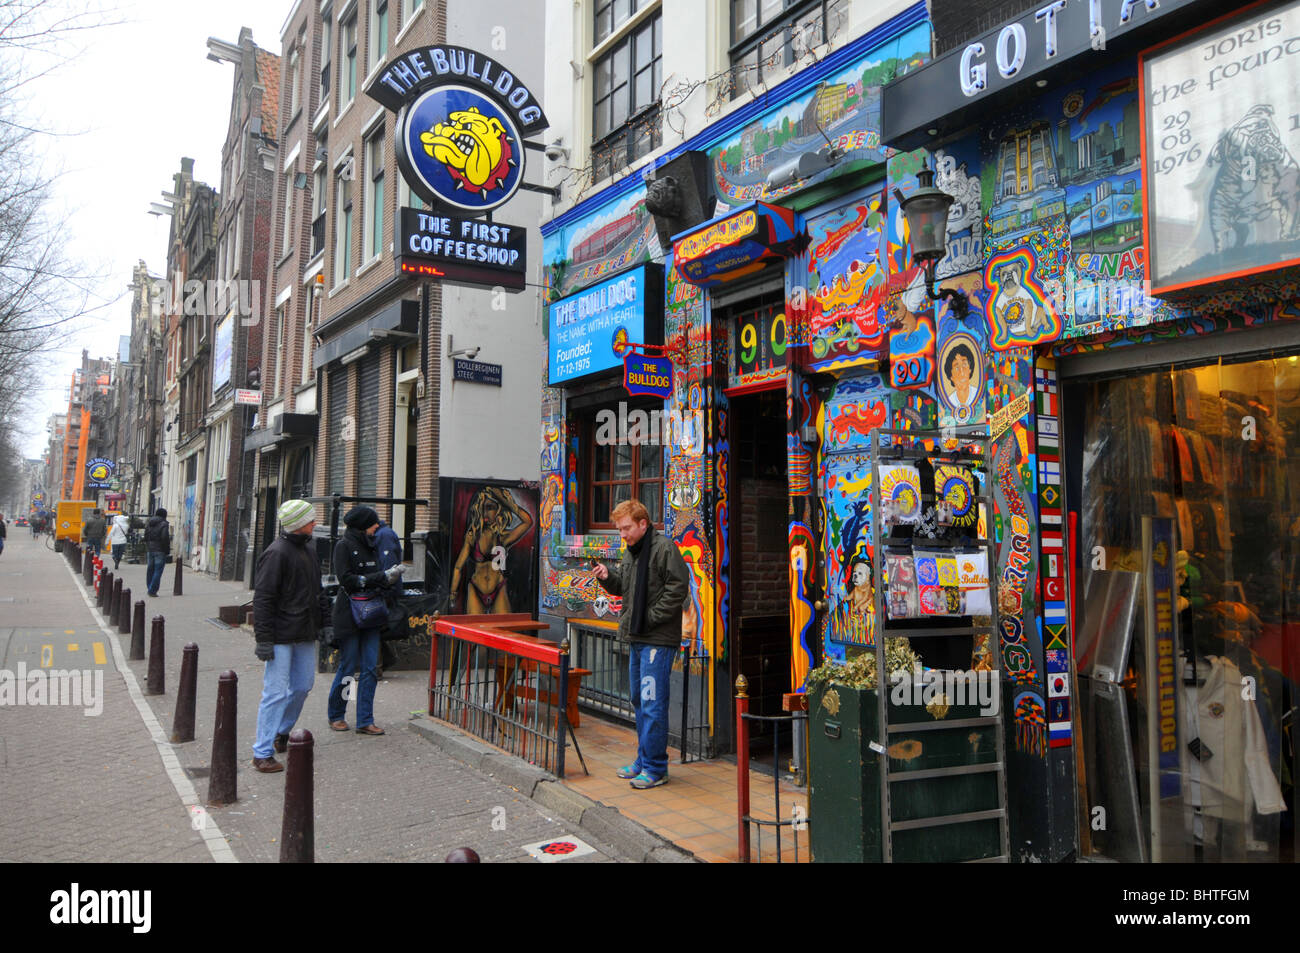 Amsterdam, Netherlands, Old Town, The Bulldog, allegedly the city's first coffee  shop, canabis trade, sale Stock Photo - Alamy